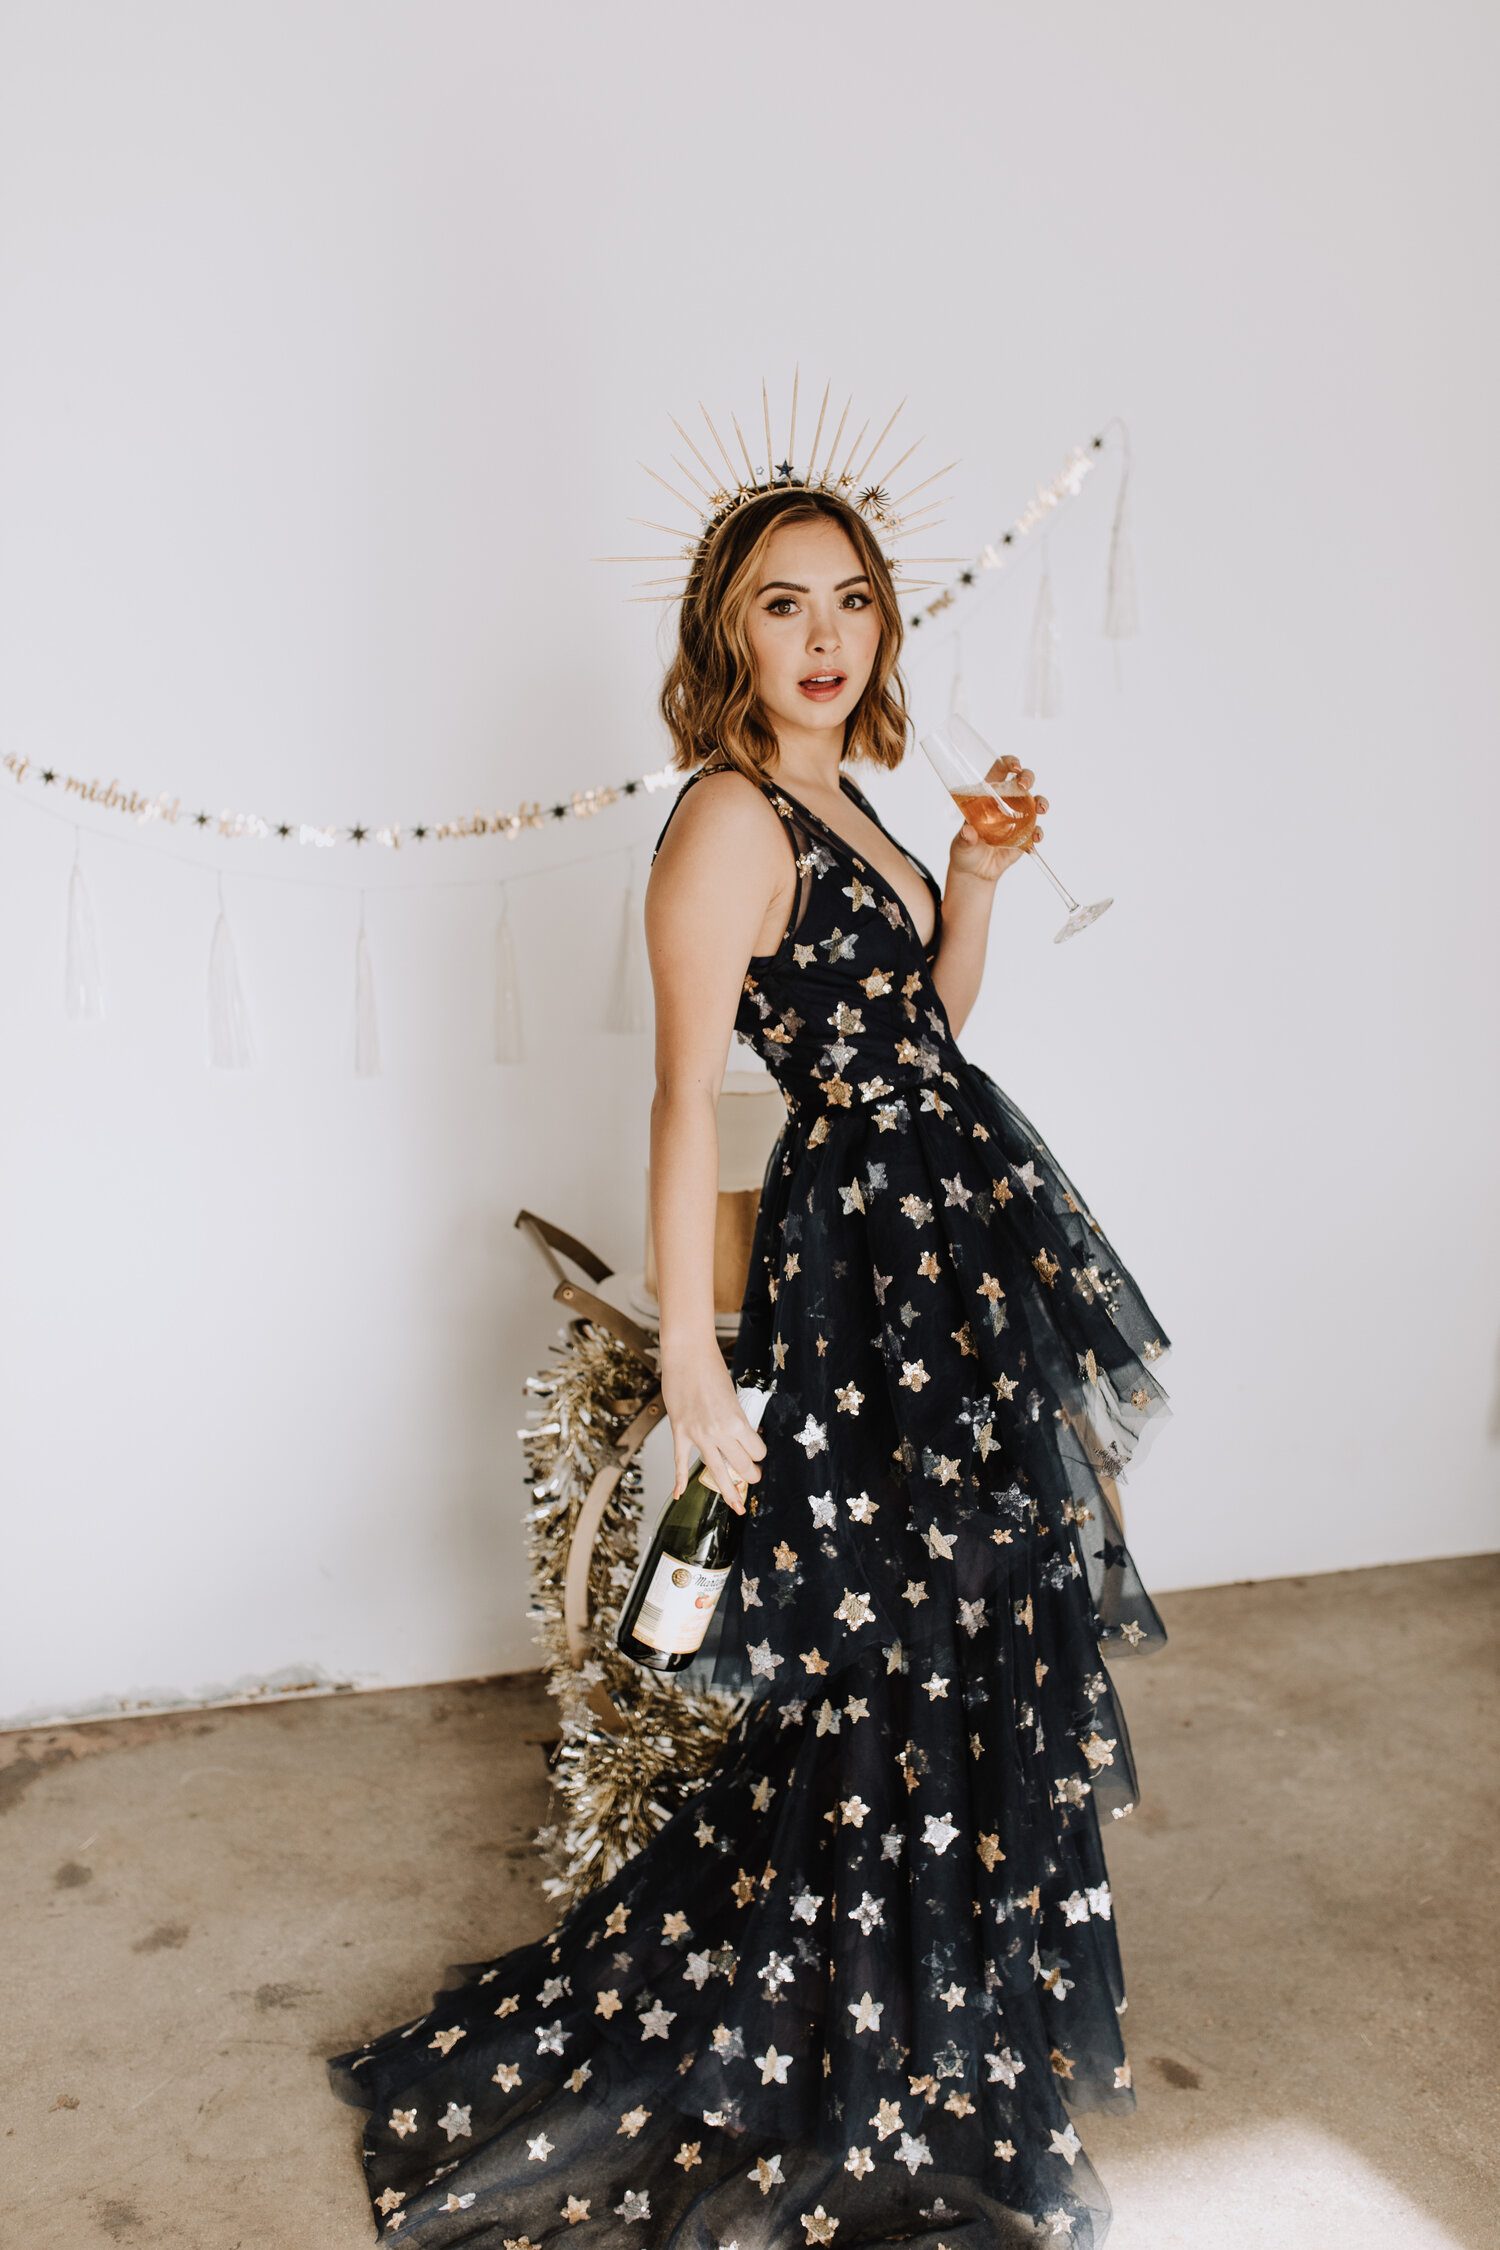 Black Cocktail Dress With Stars